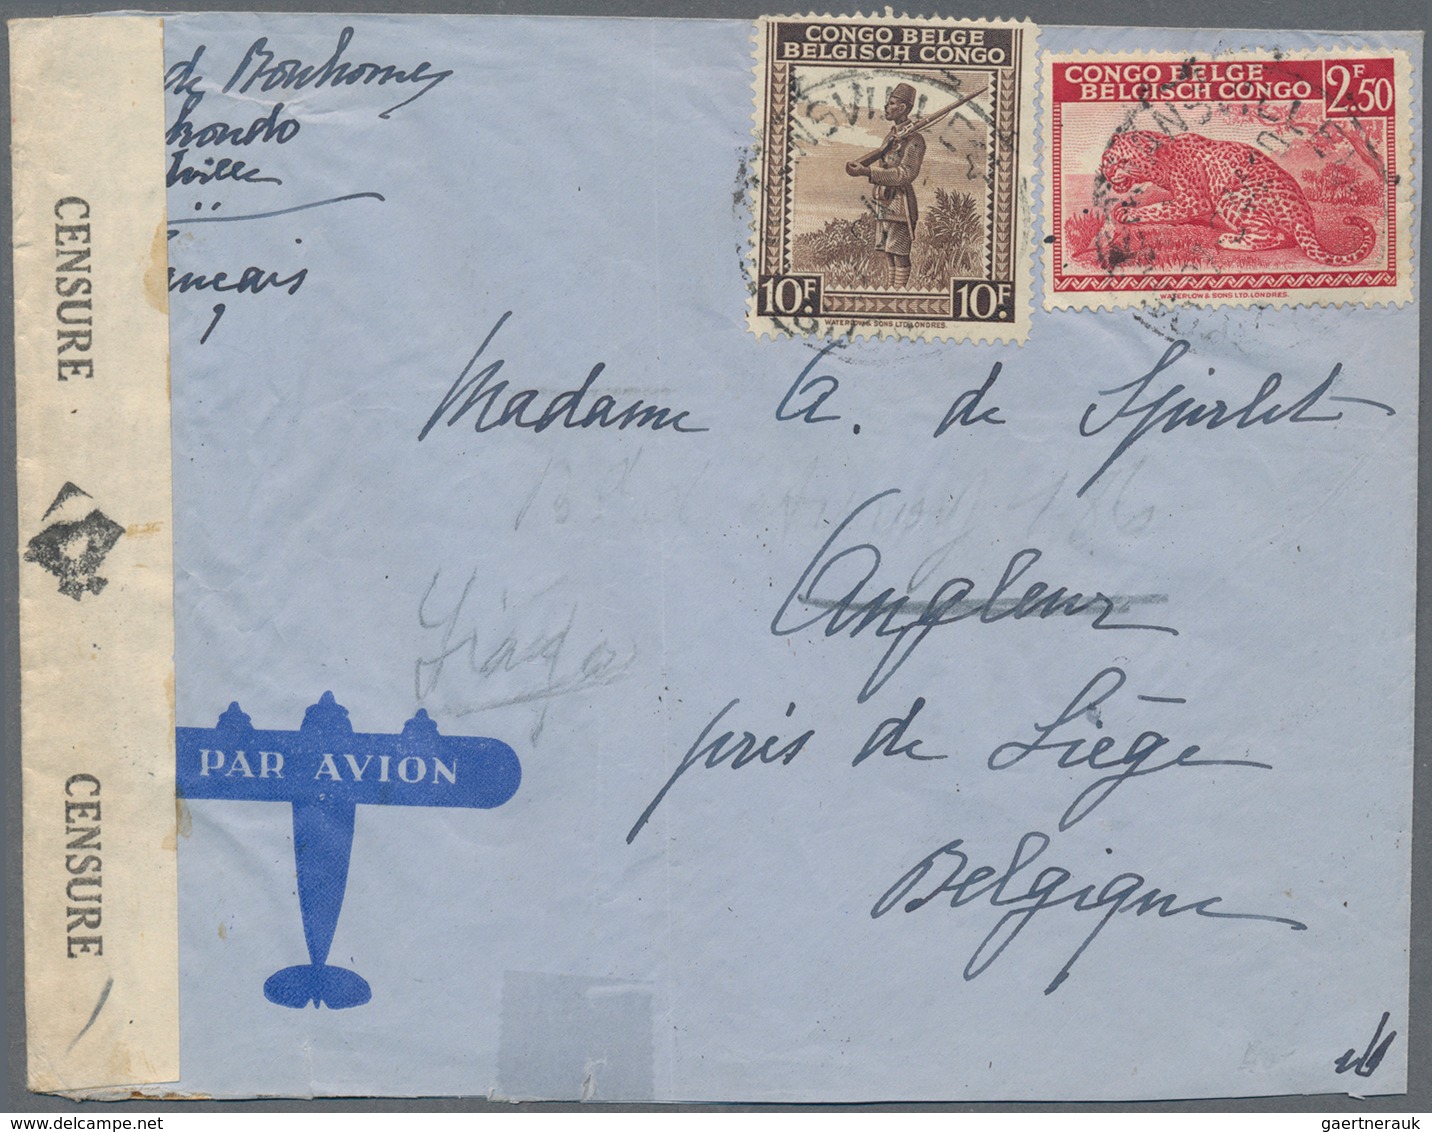 Zensurpost: 1939/1945 ca., interesting collection with ca.70 censored covers from WWII era, comprisi